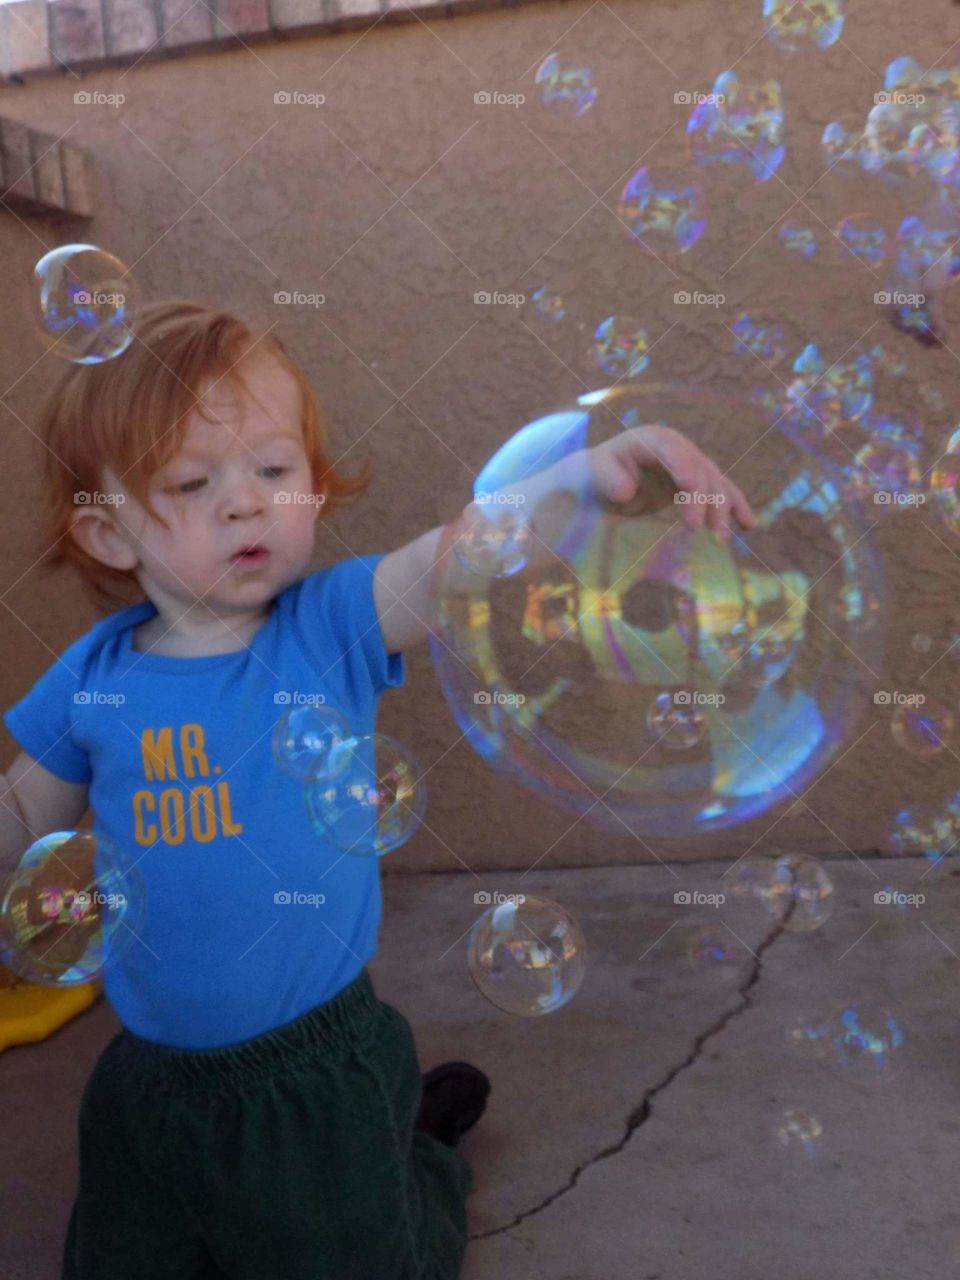 Never-ending fun with bubbles of many sizes